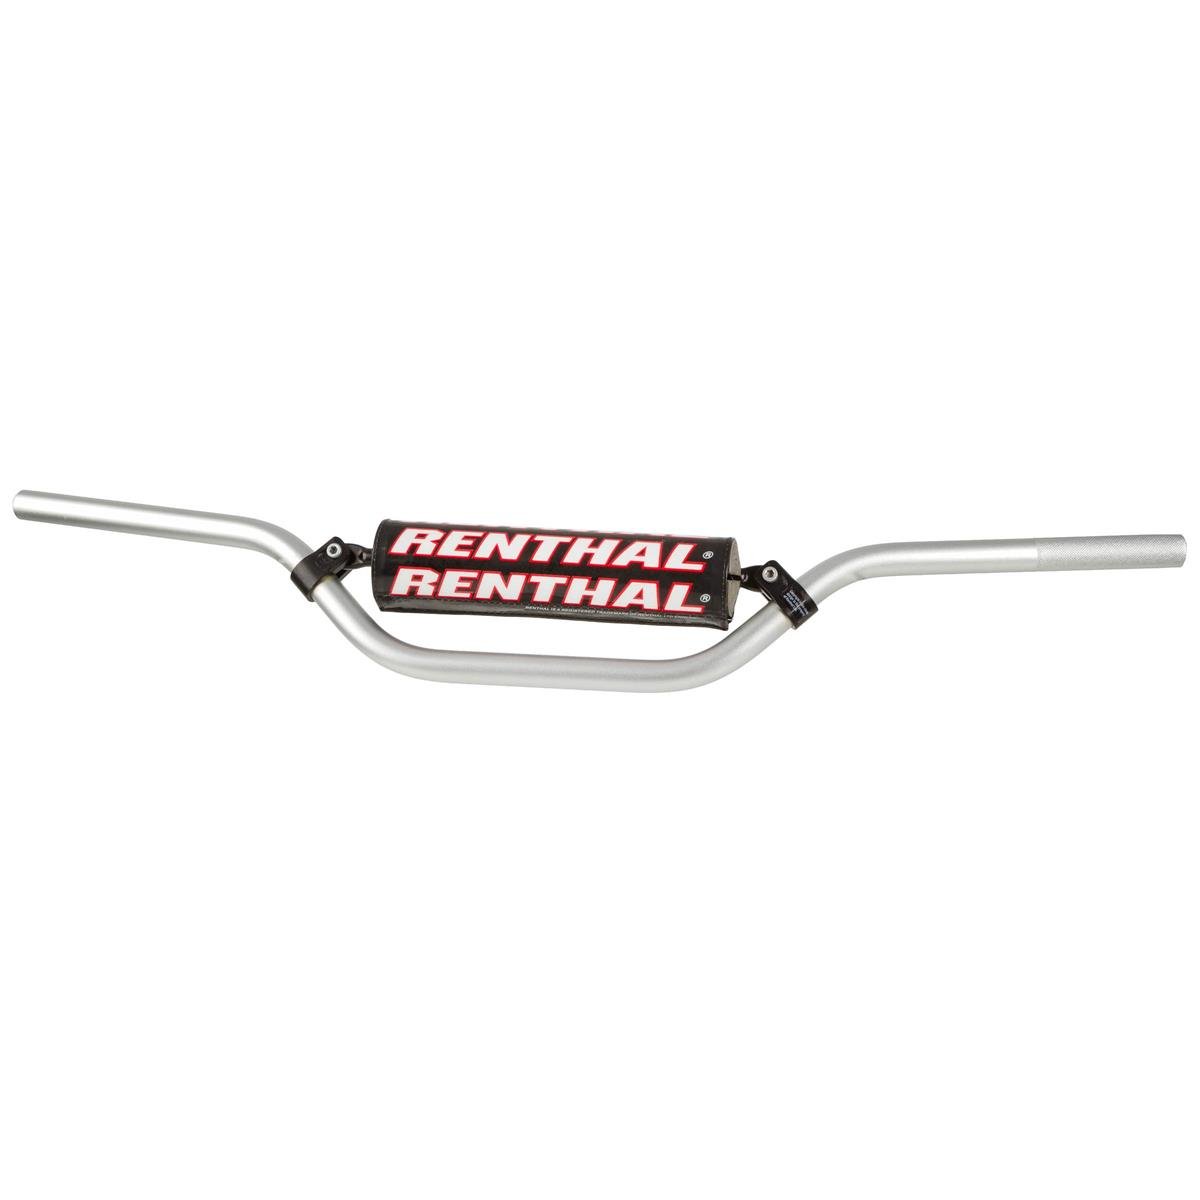 Renthal Guidon Offroad 809 Argent